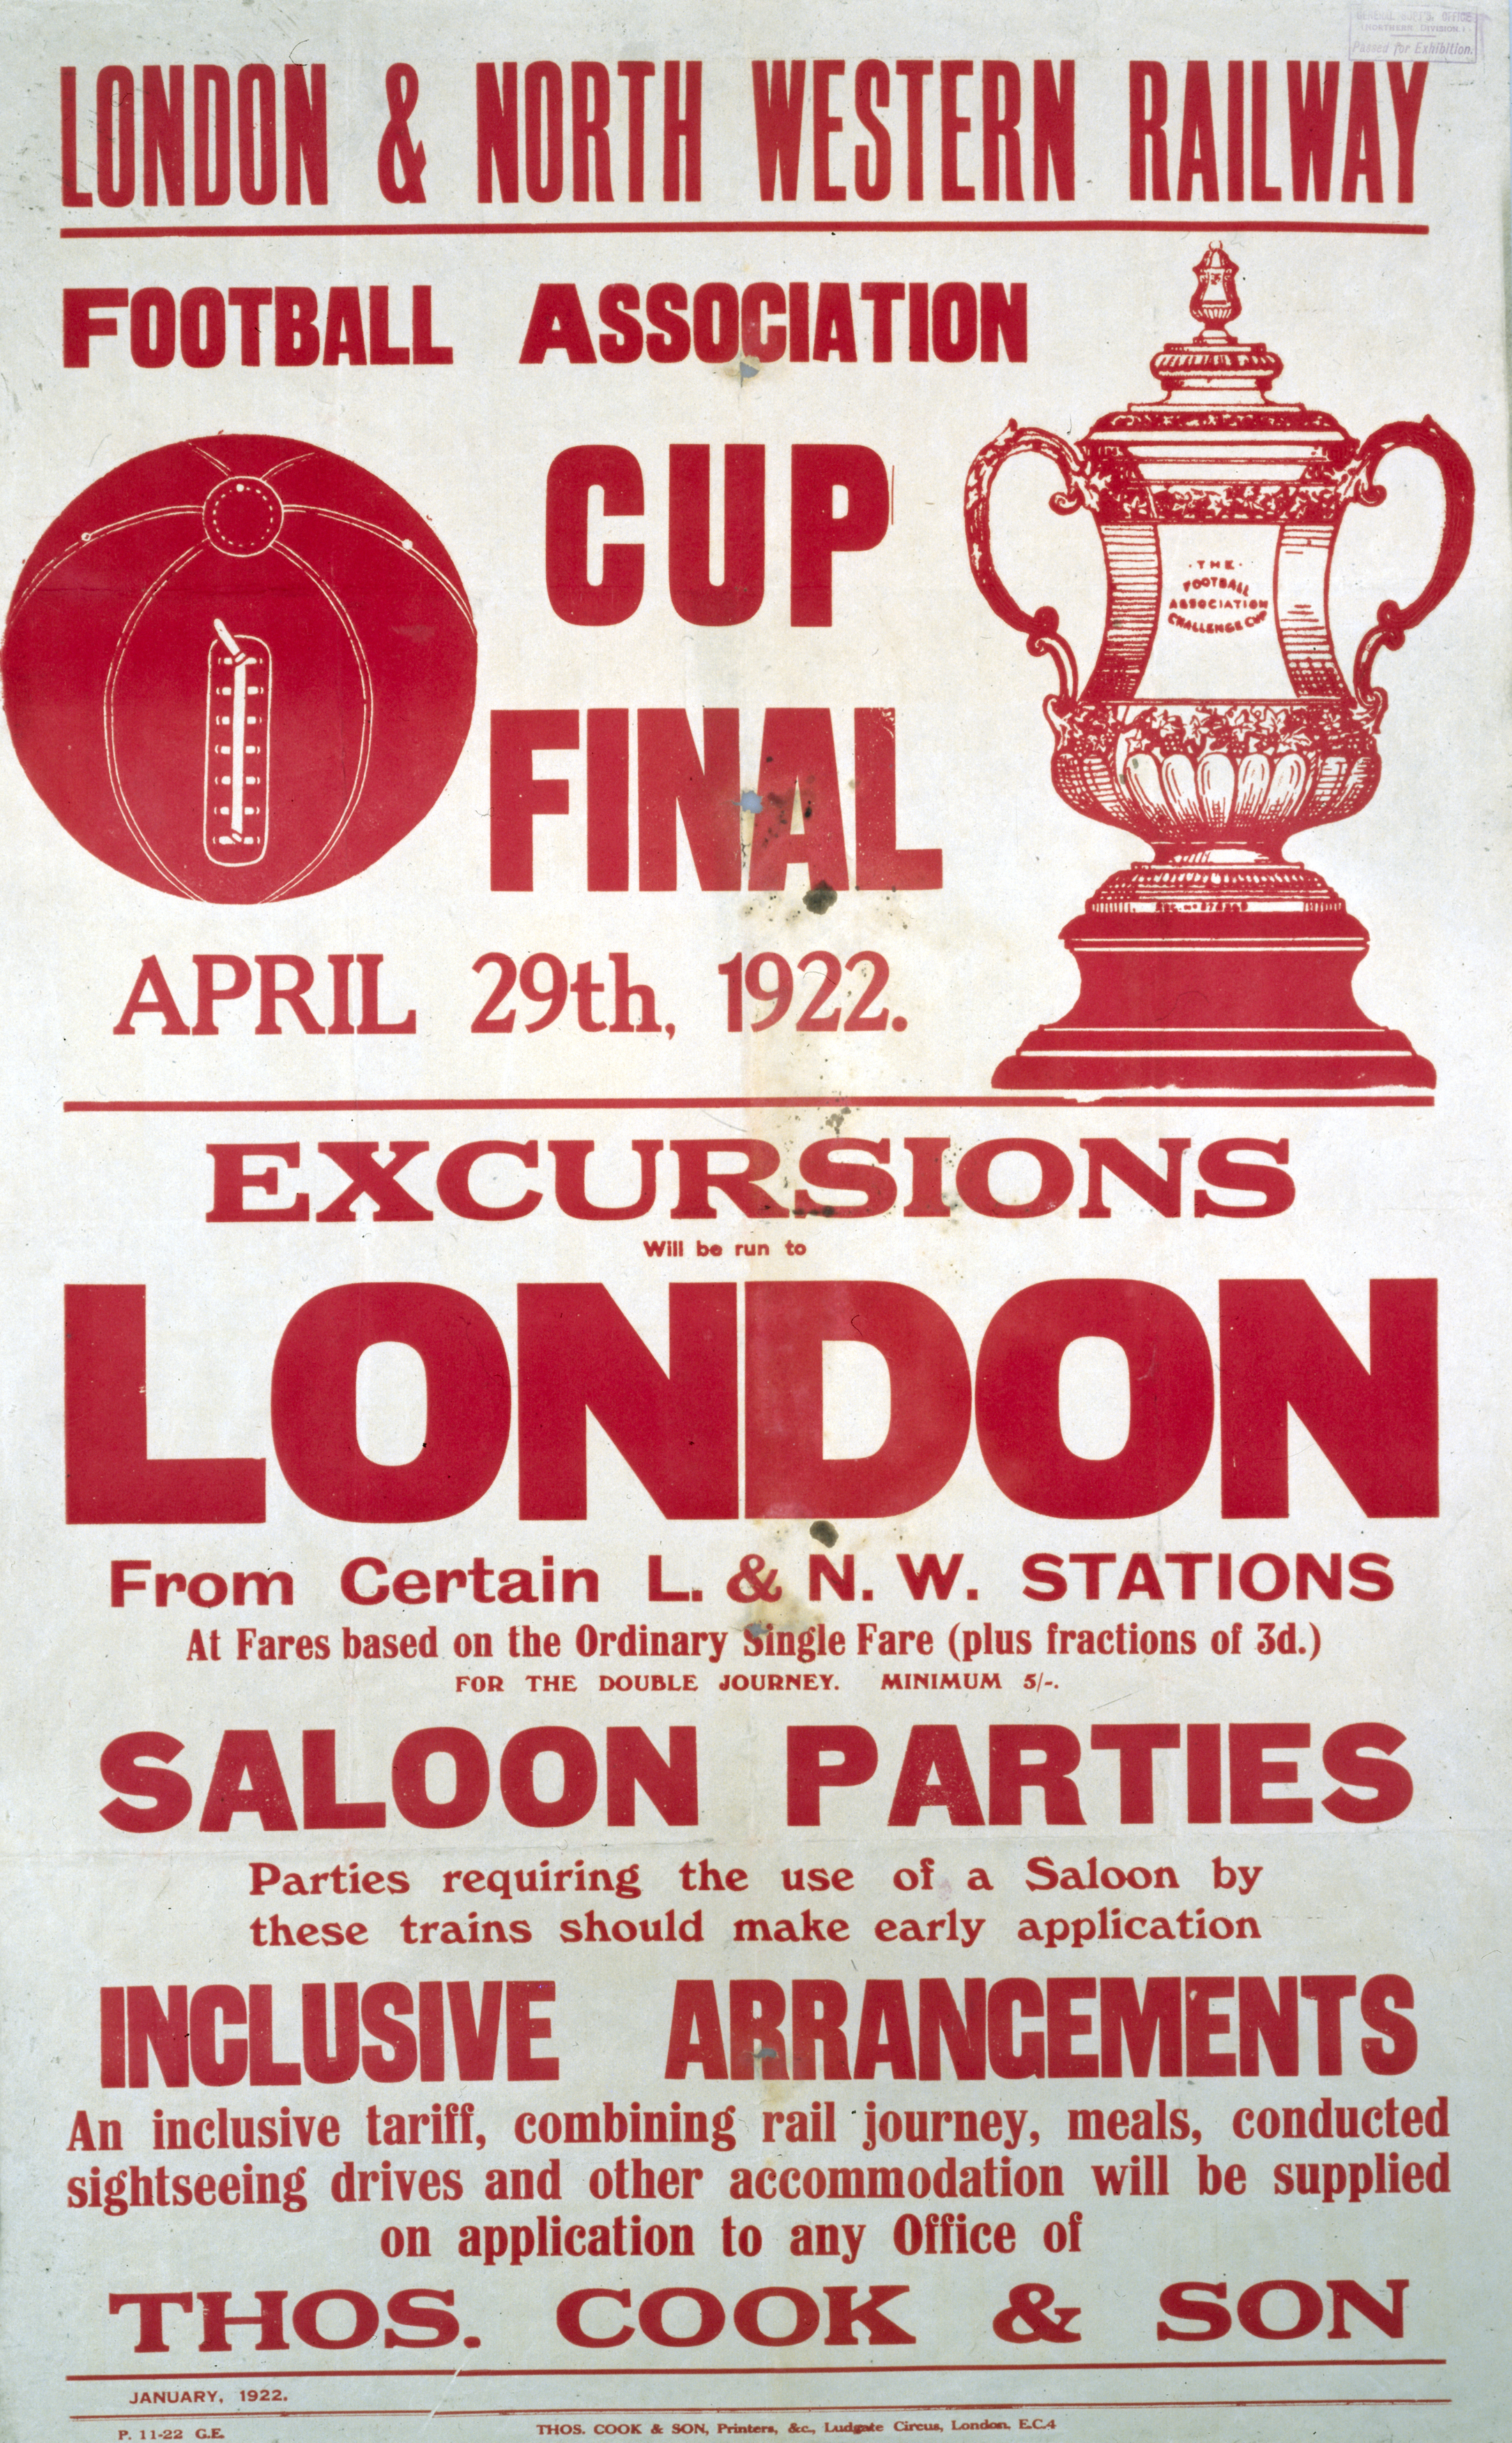 Football Association Cup Final', LNWR notice, 1922. (ref ) Poster advertising excursions to London for the FA Cup Final, 29 April 1922. 